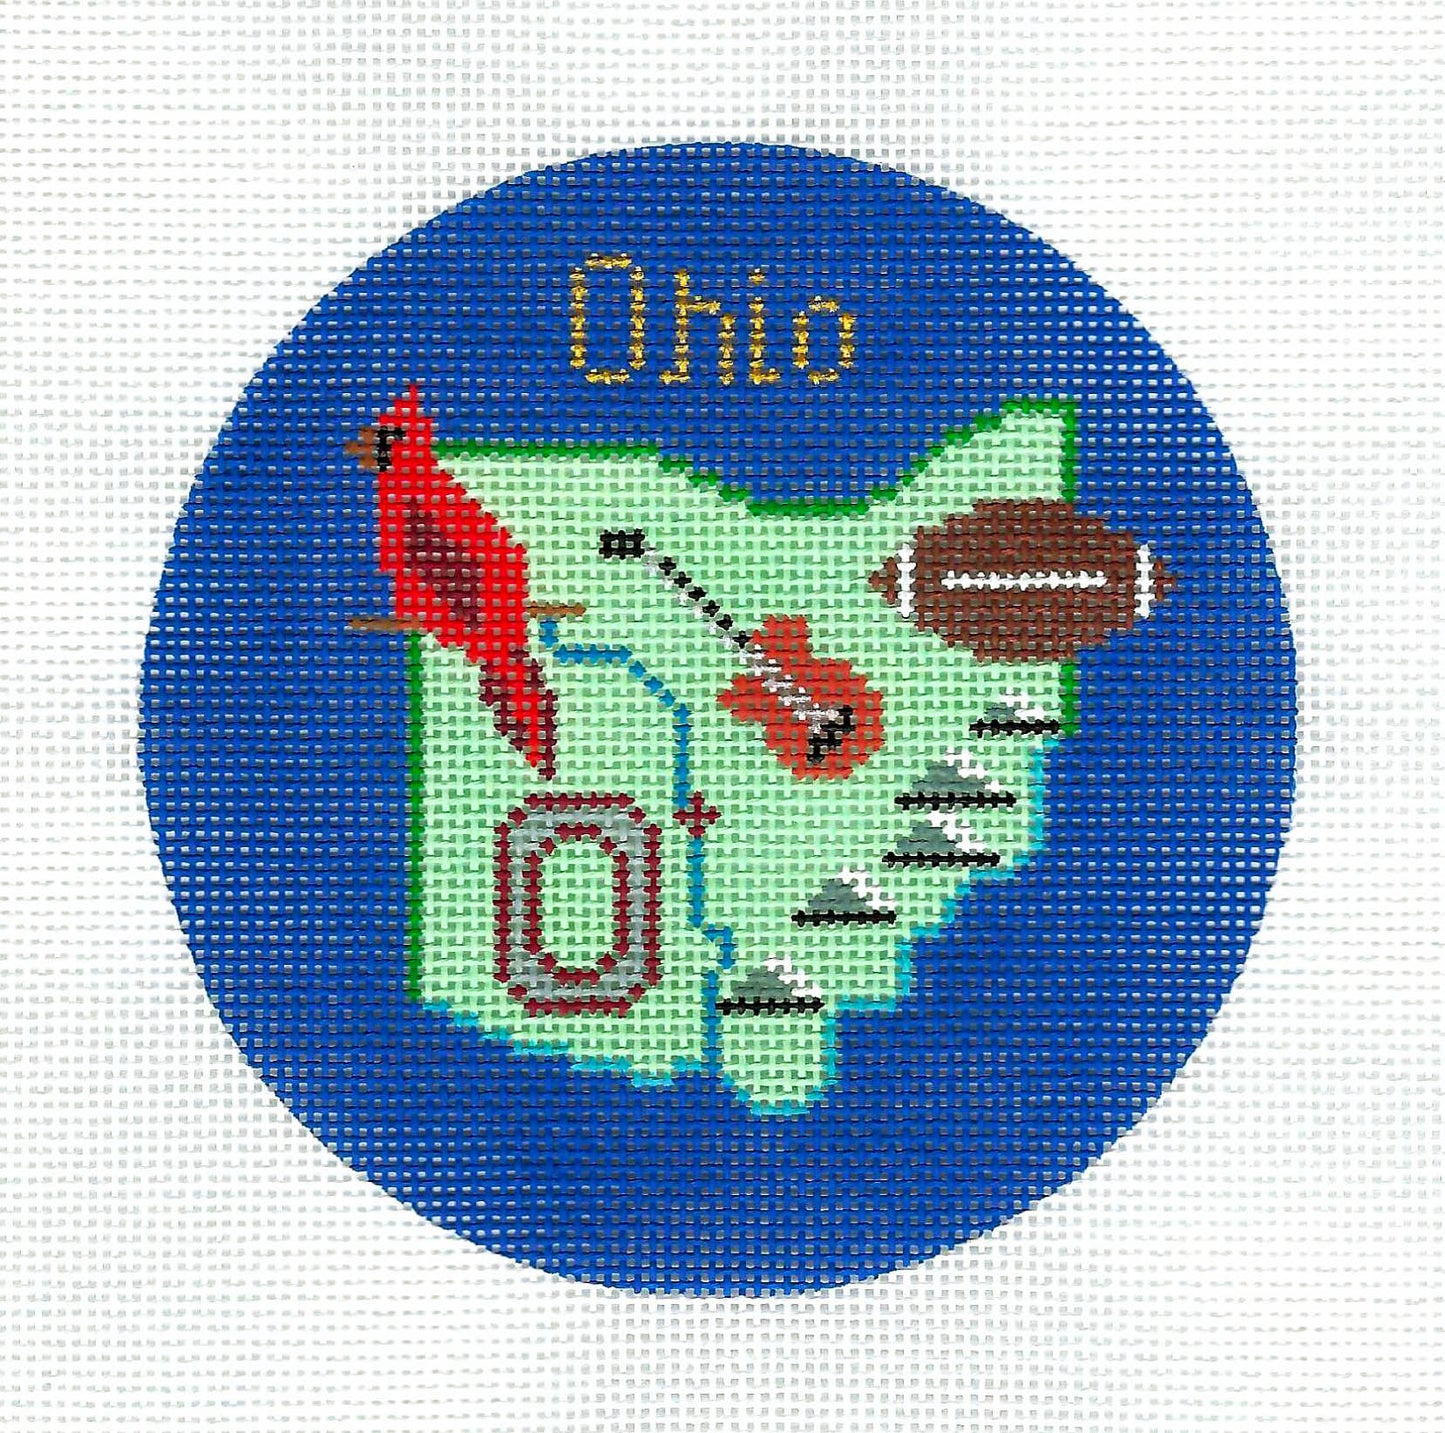 Travel Round ~ State of OHIO handpainted 4.25" Needlepoint Canvas by Silver Needle